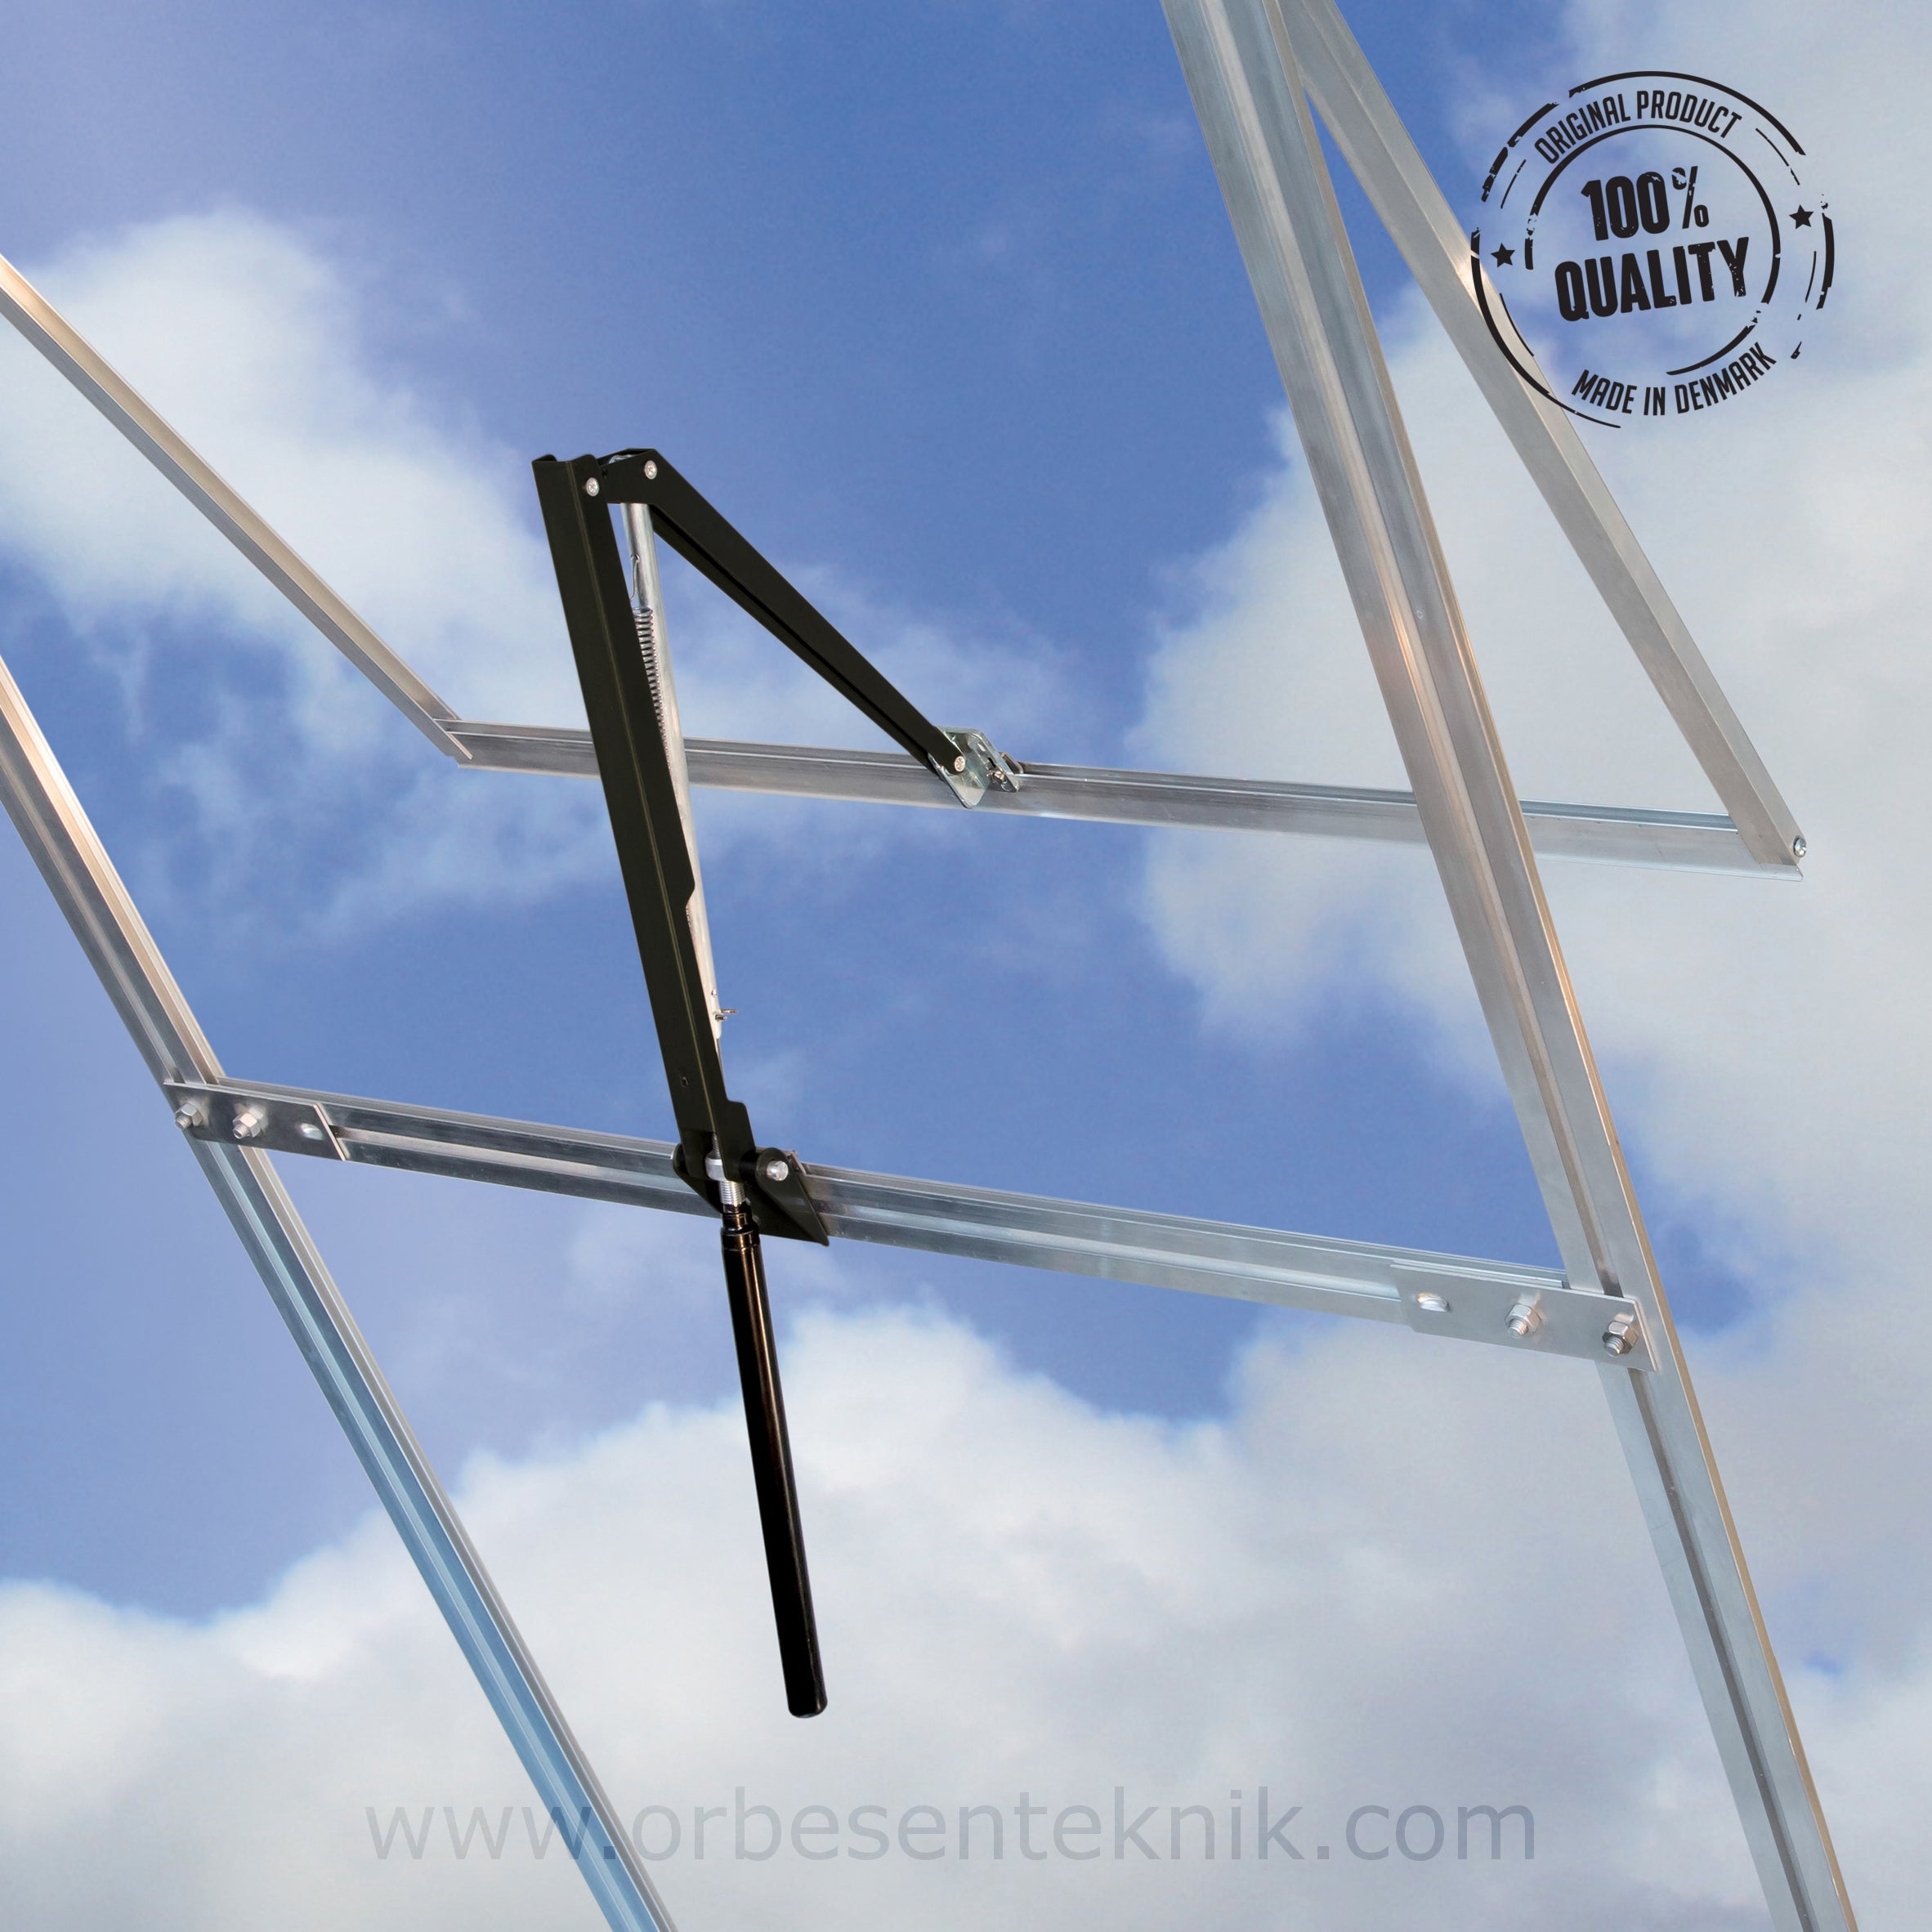 Greenhouse Accessories - Janssens™ GH Additional Roof Window And Accessories